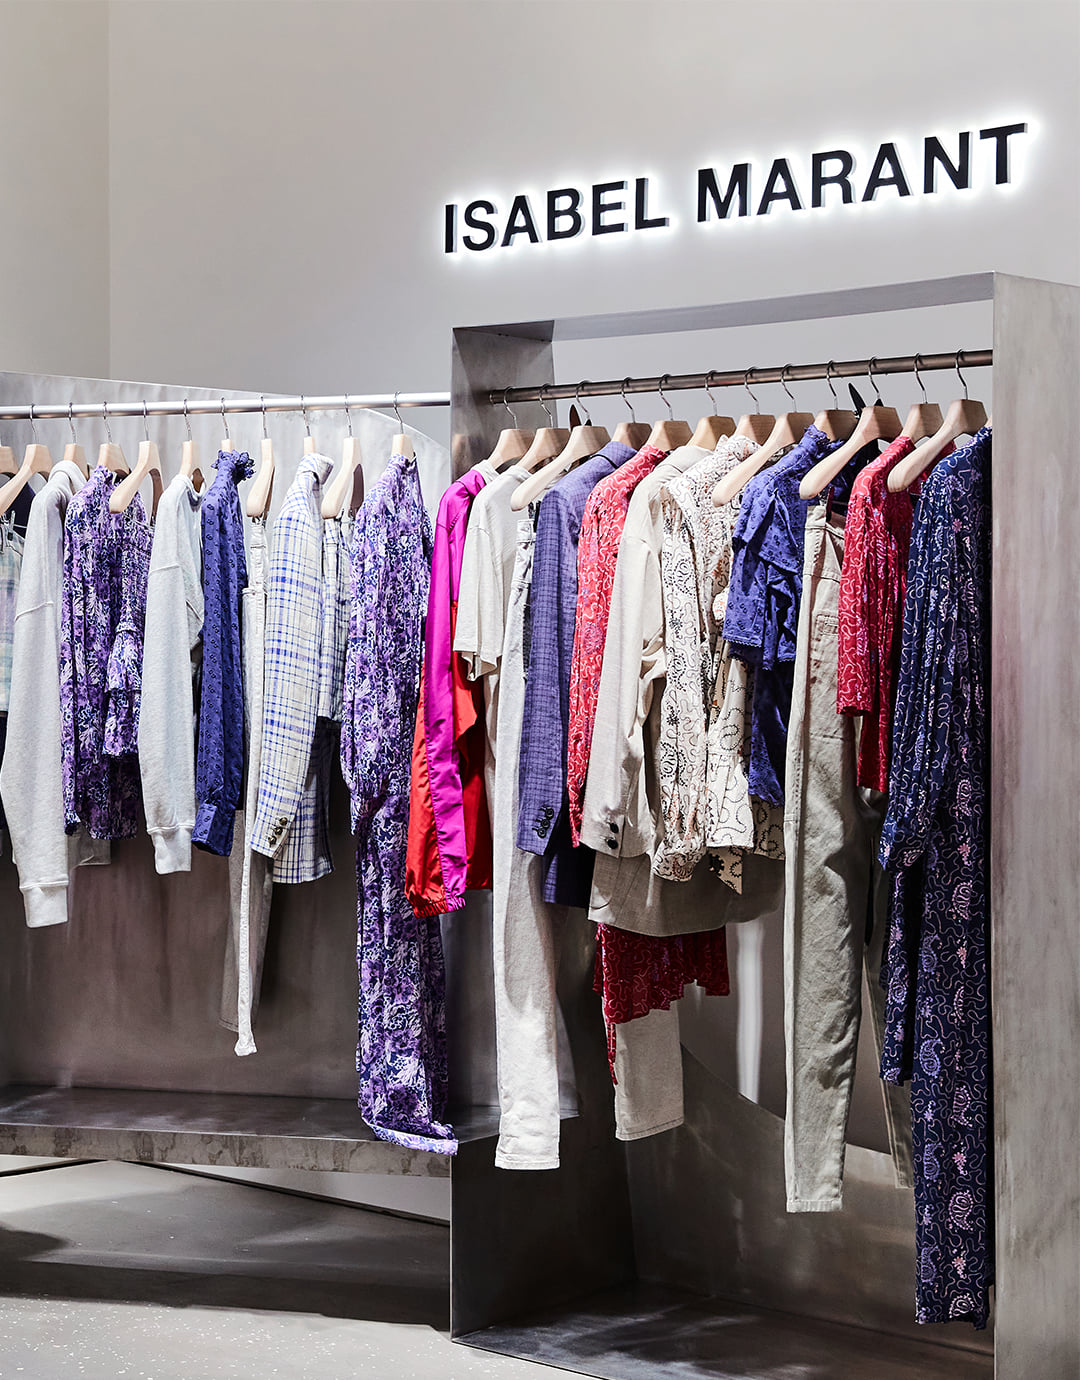 CPP-LUXURY.COM on Twitter: "Isabel Marant opens new store in Seoul at Hyundai Department store https://t.co/5WcZNb7BWW #IsabelMarant #Seoul #HyundaiDepartmentStore #newopening #luxury #luxuryfashion https://t.co/j0S29zxvoA" / Twitter